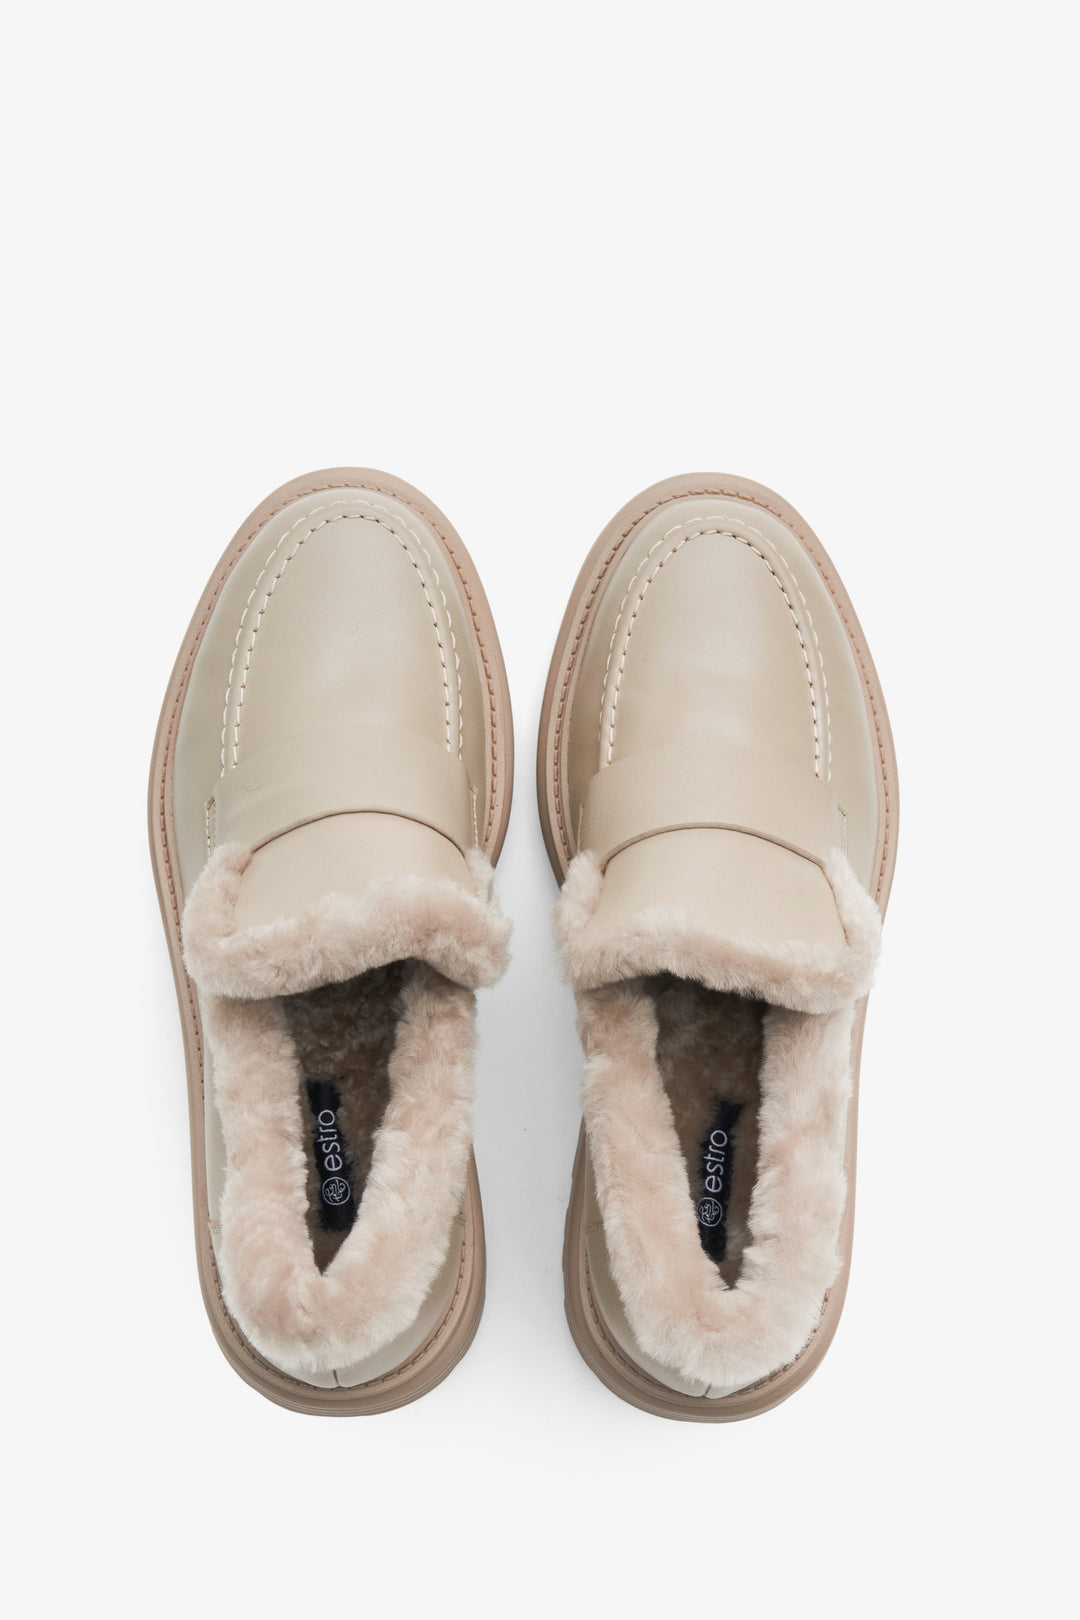 Estro women's moccasins in beige made of genuine leather with insulation - top view presentation of the model.